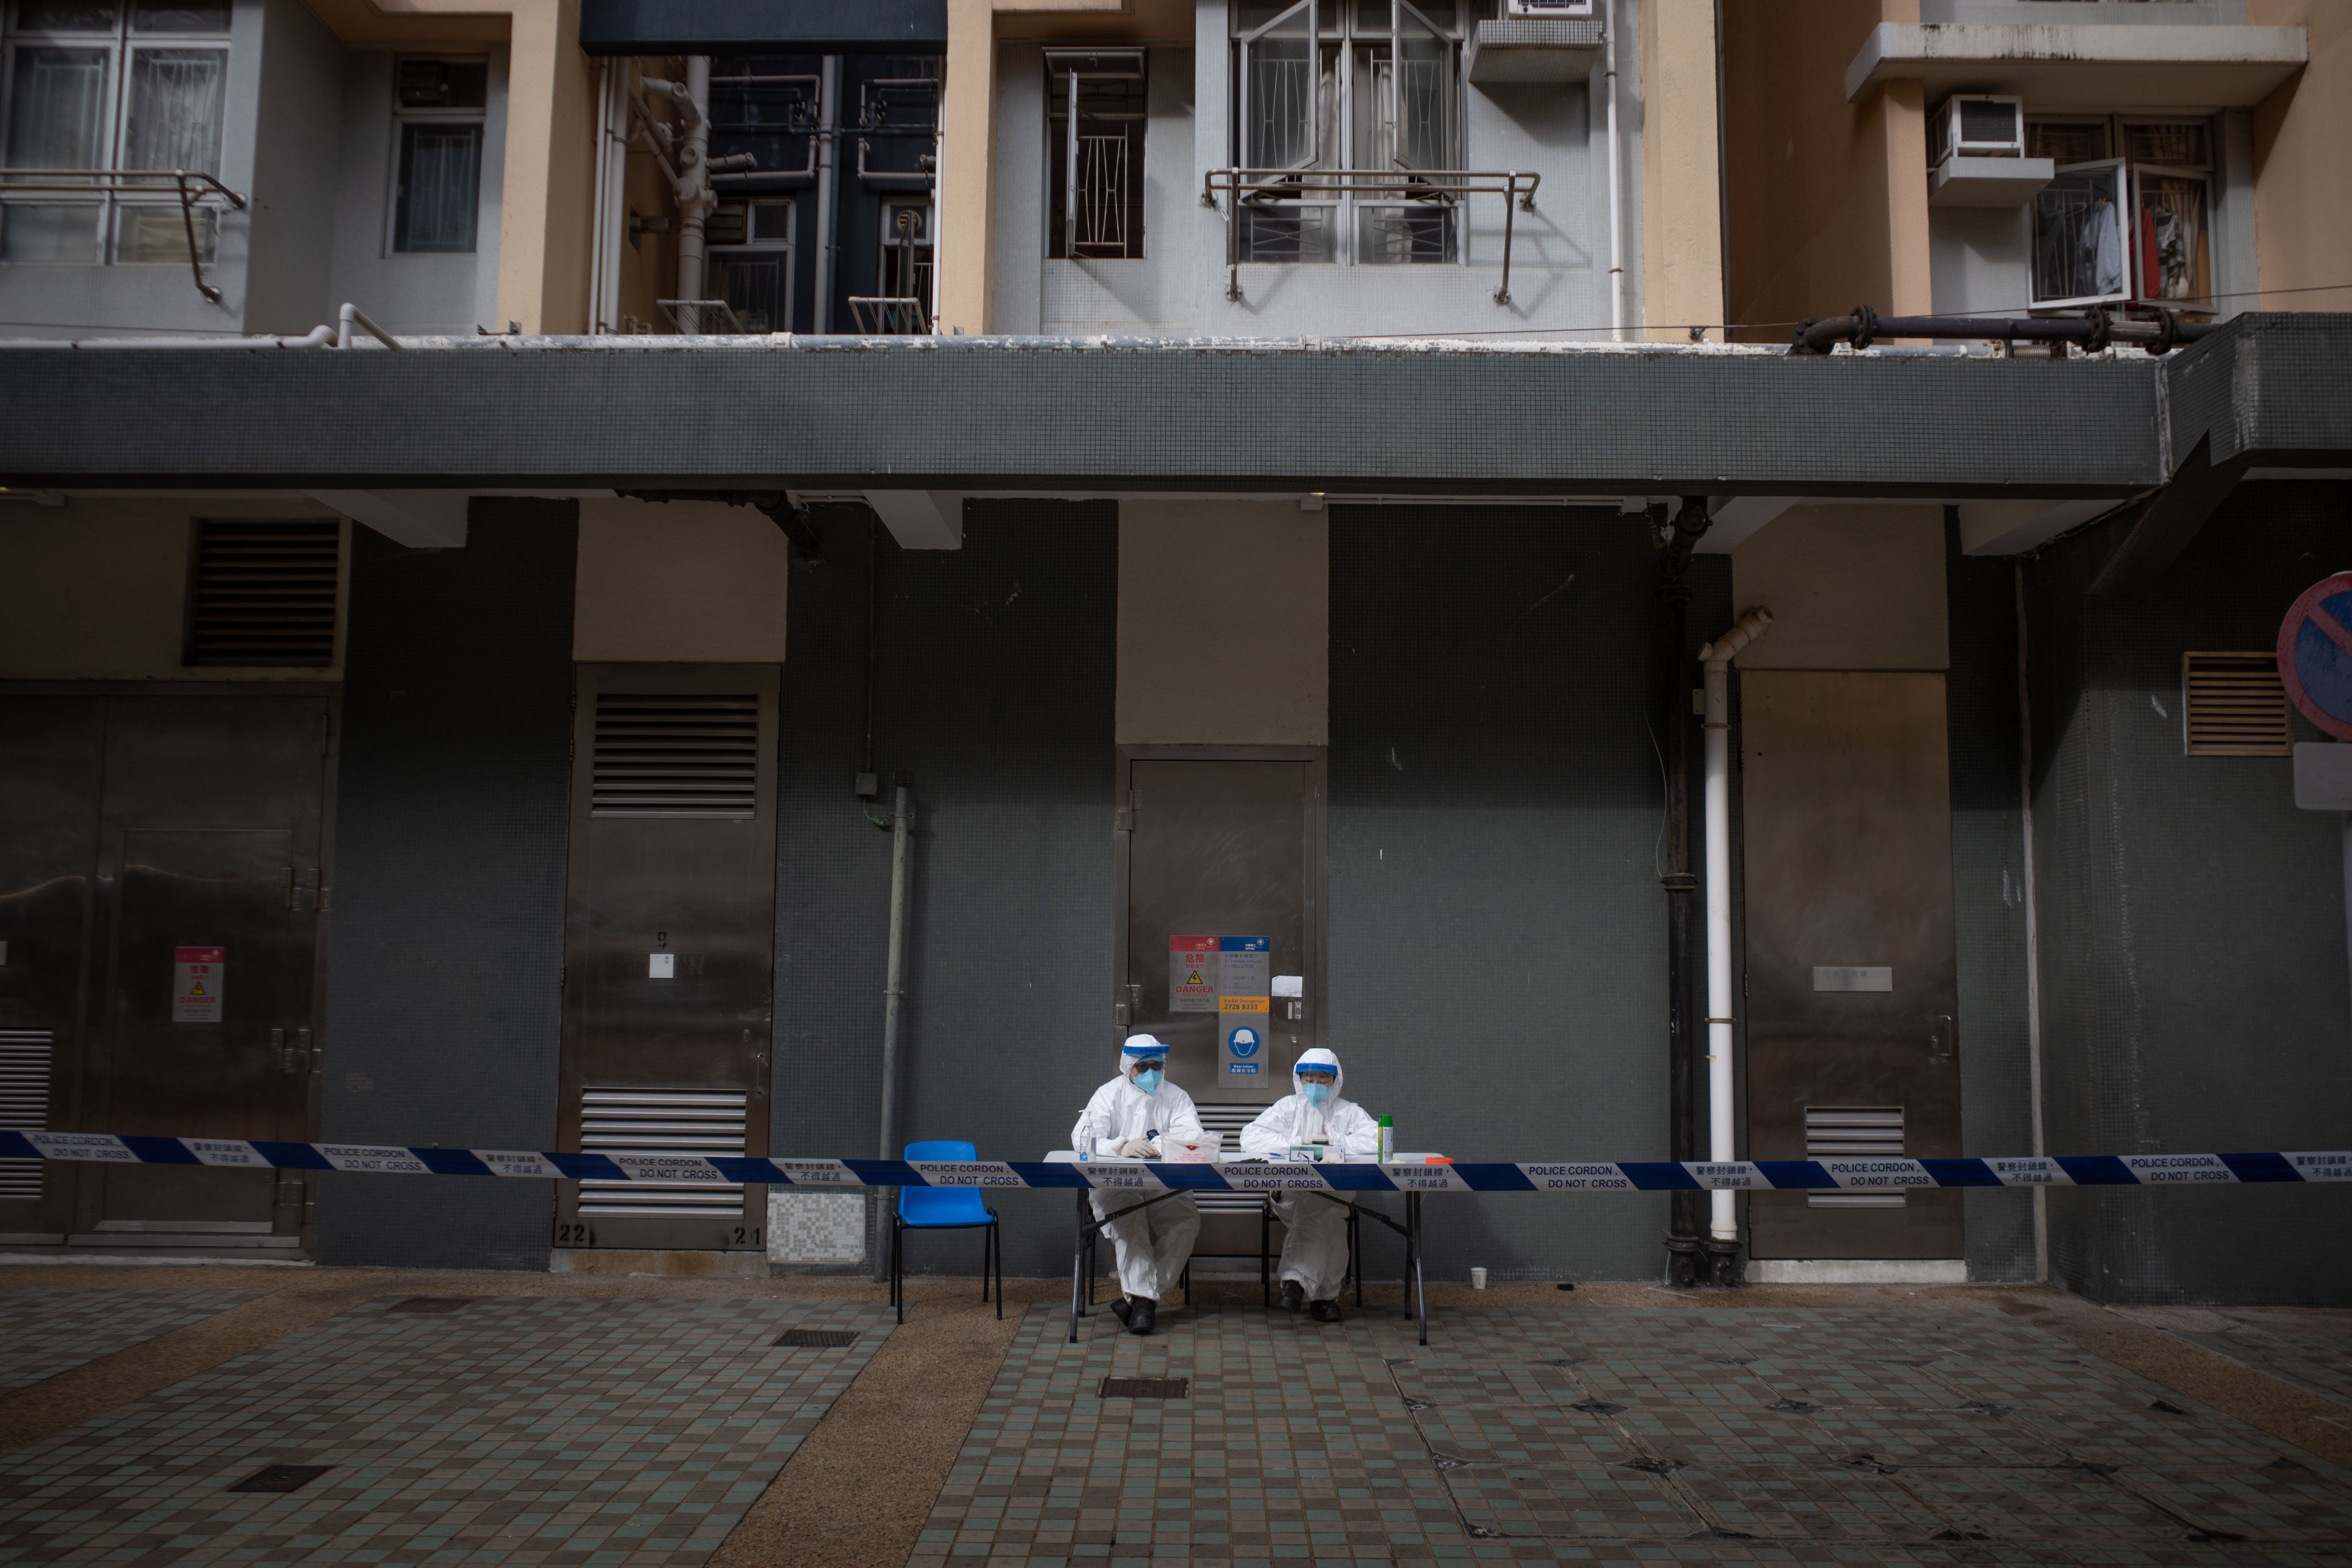 Health officials wearing personal protective equipment sit outside a residential building at the Kwai Chung Estate in Hong Kong, on January 23, after the government placed buildings at the public housing complex under lockdown. Photo: Bloomberg